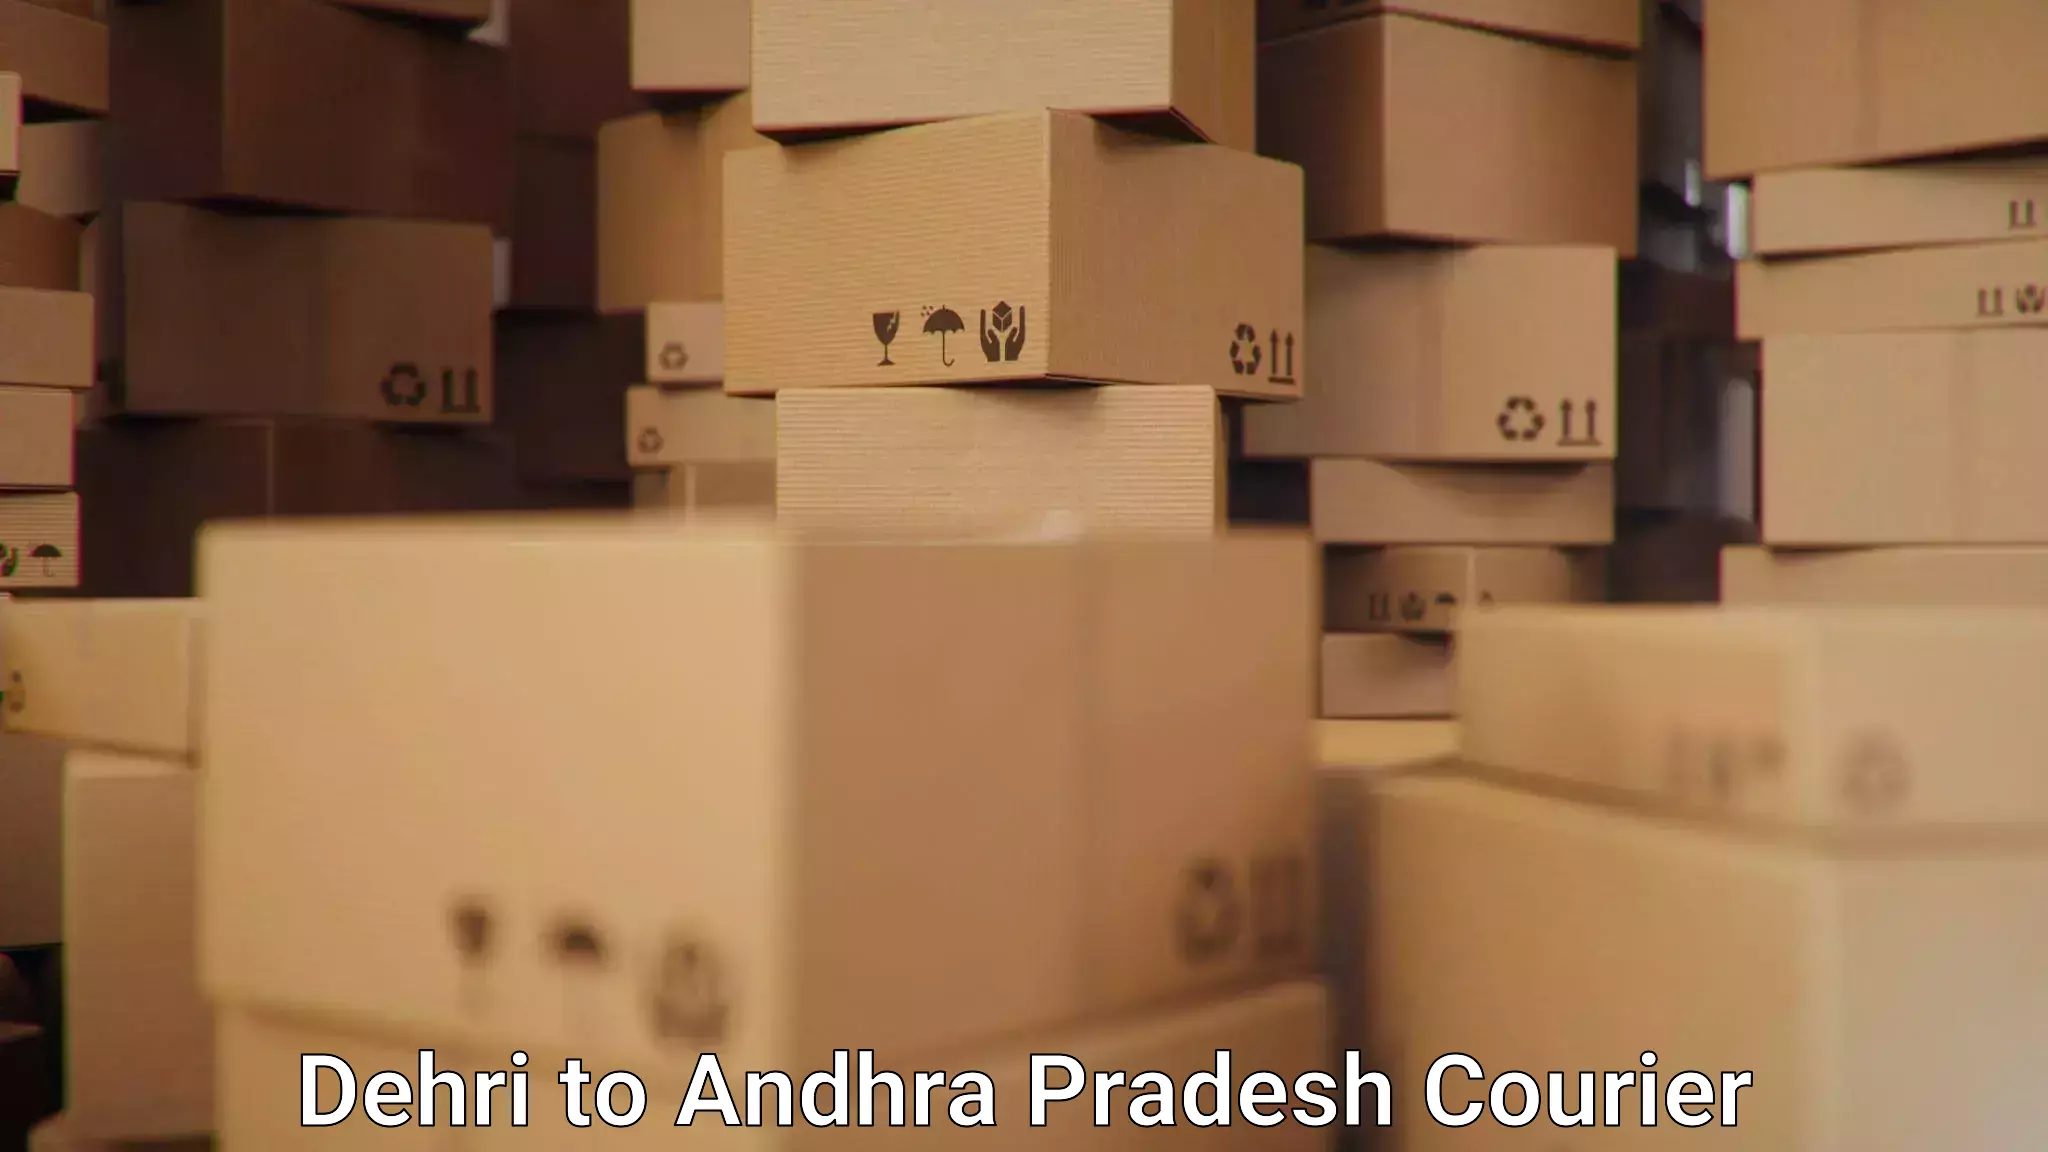 Subscription-based courier in Dehri to Visakhapatnam Port